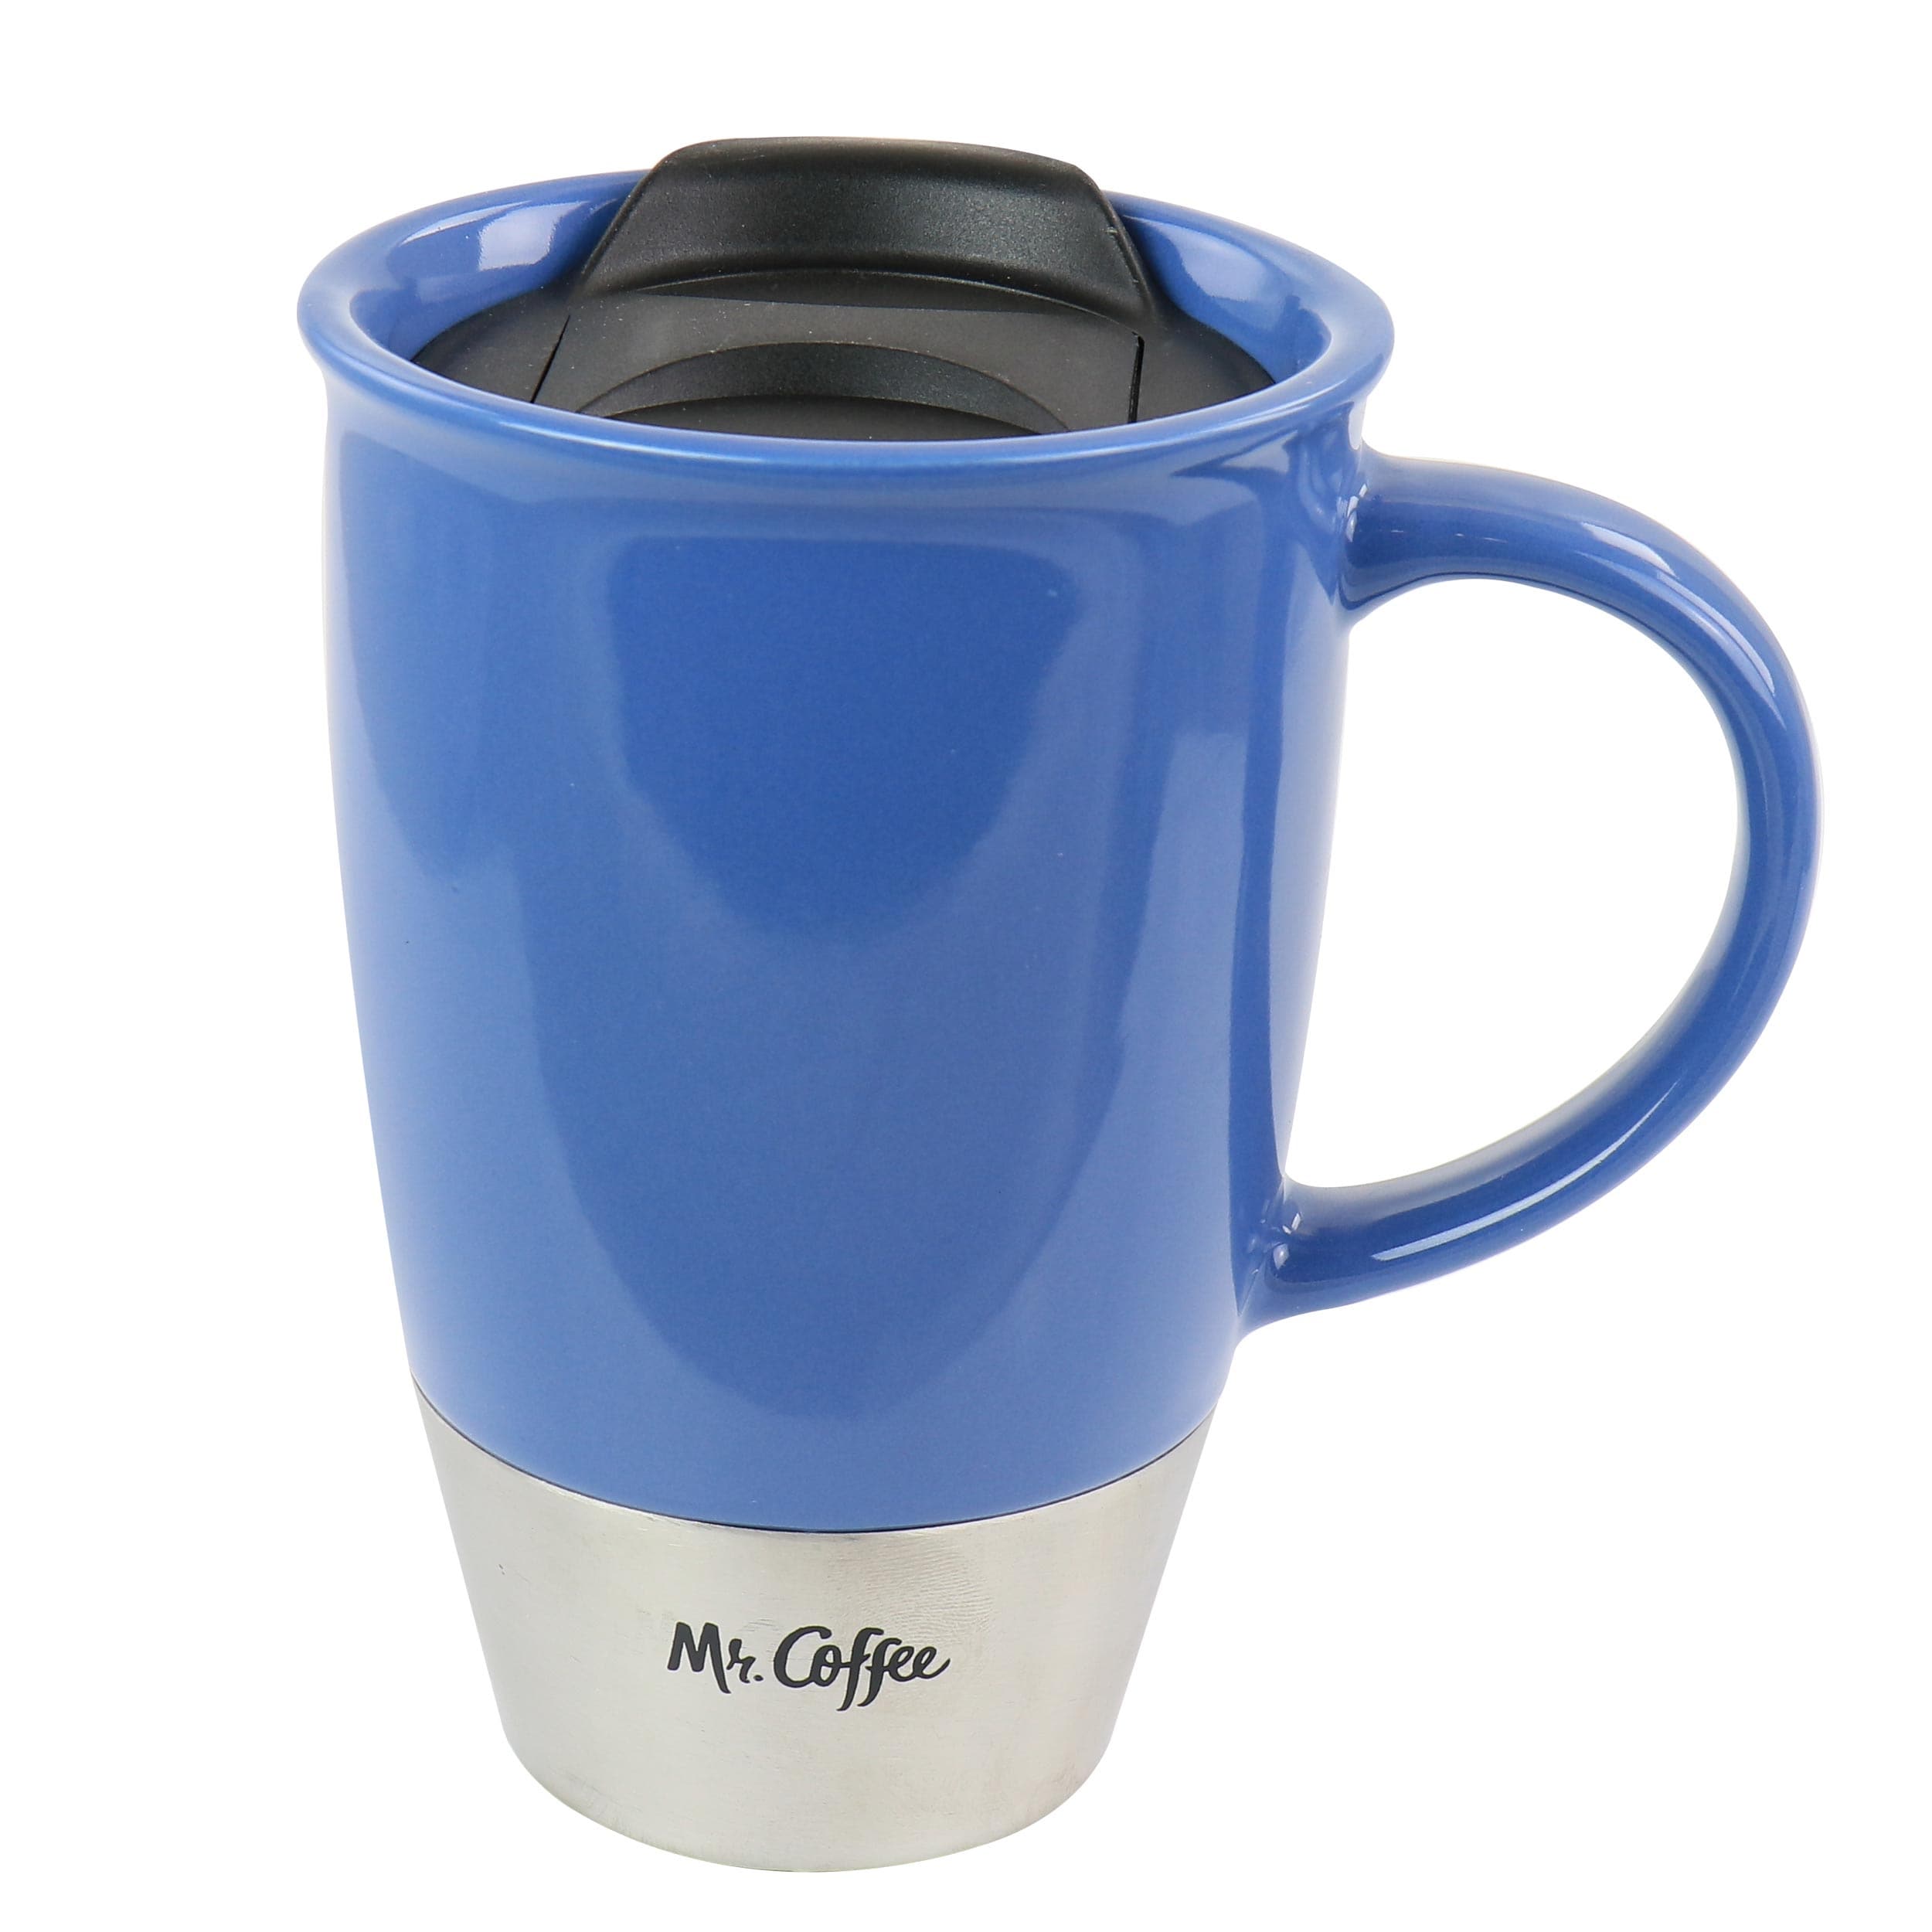 https://ak1.ostkcdn.com/images/products/is/images/direct/71a830197b341d2e5c549f91e661c10a871de4f1/Mr.-Coffee14-oz-Stoneware-Assorted-Travel-Mugs-set-of-3.jpg